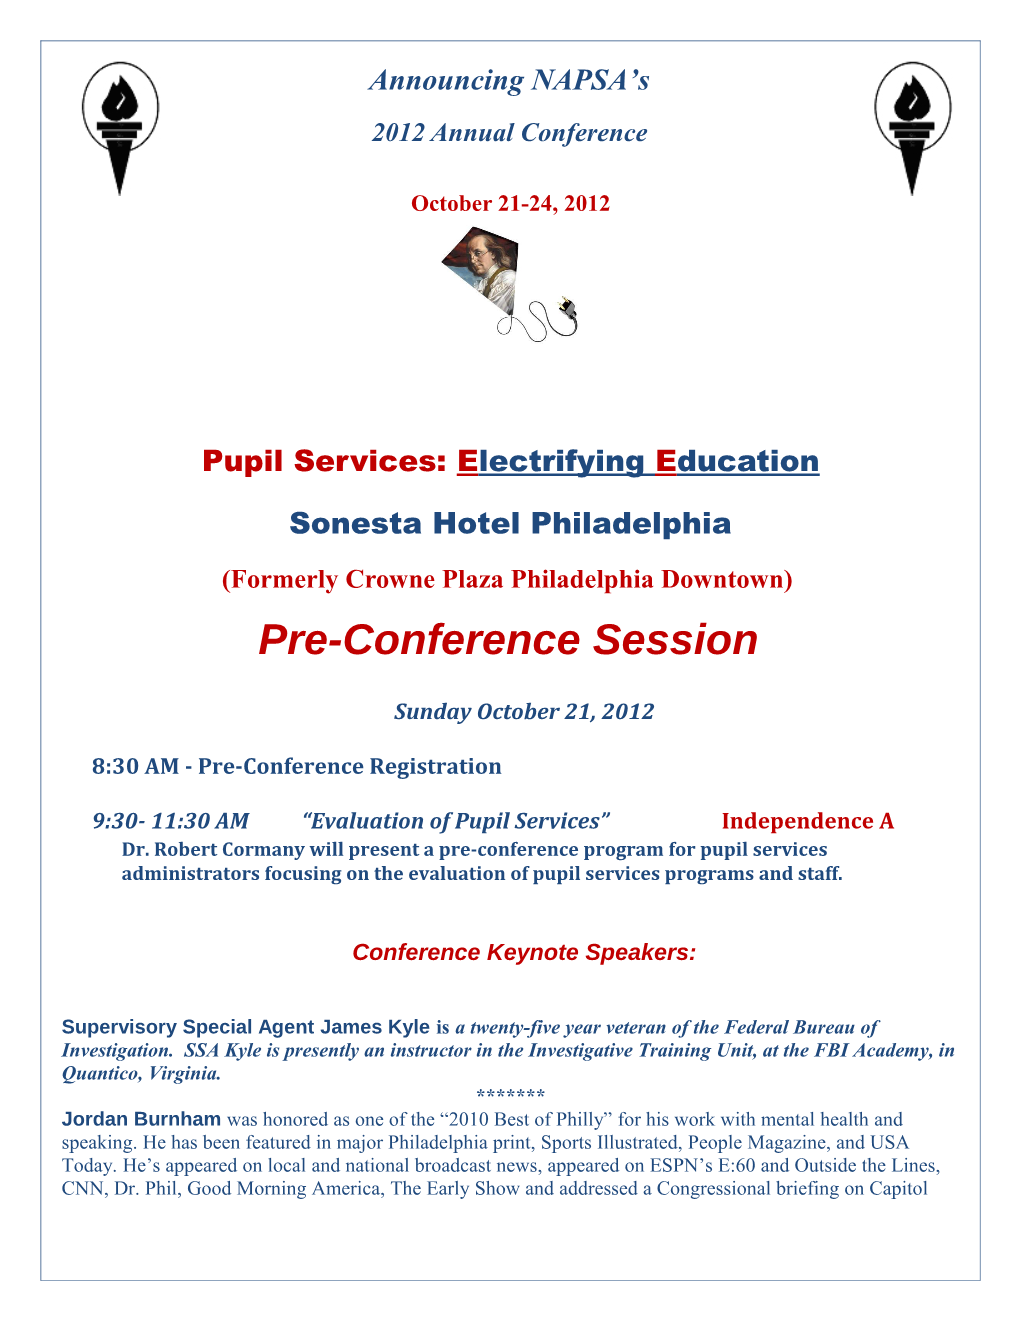 Pupil Services: Electrifying Education